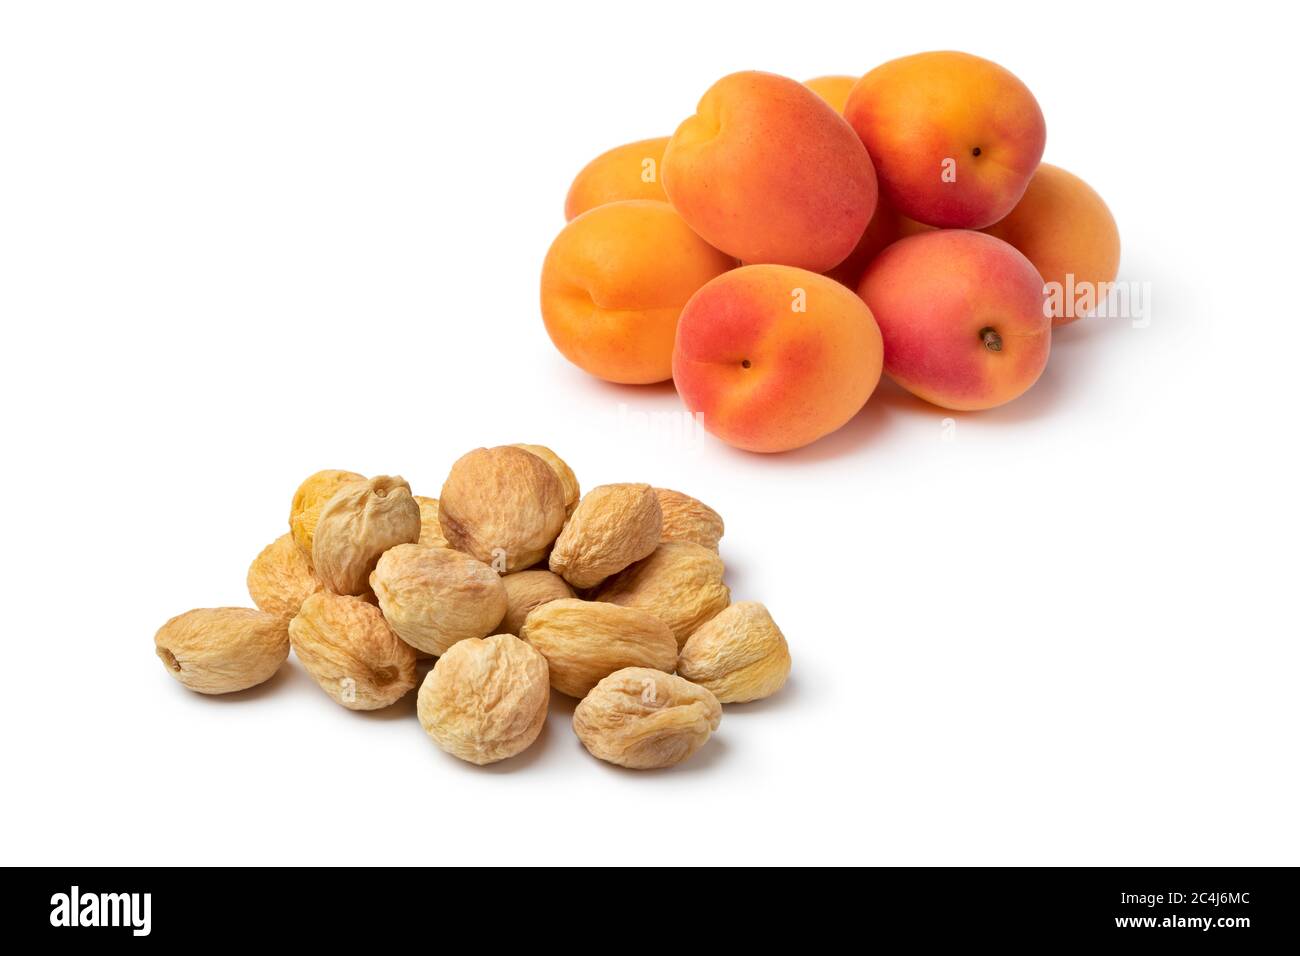 Heap of fresh and dried sweet orange apricots without preservatives isolated on white background Stock Photo